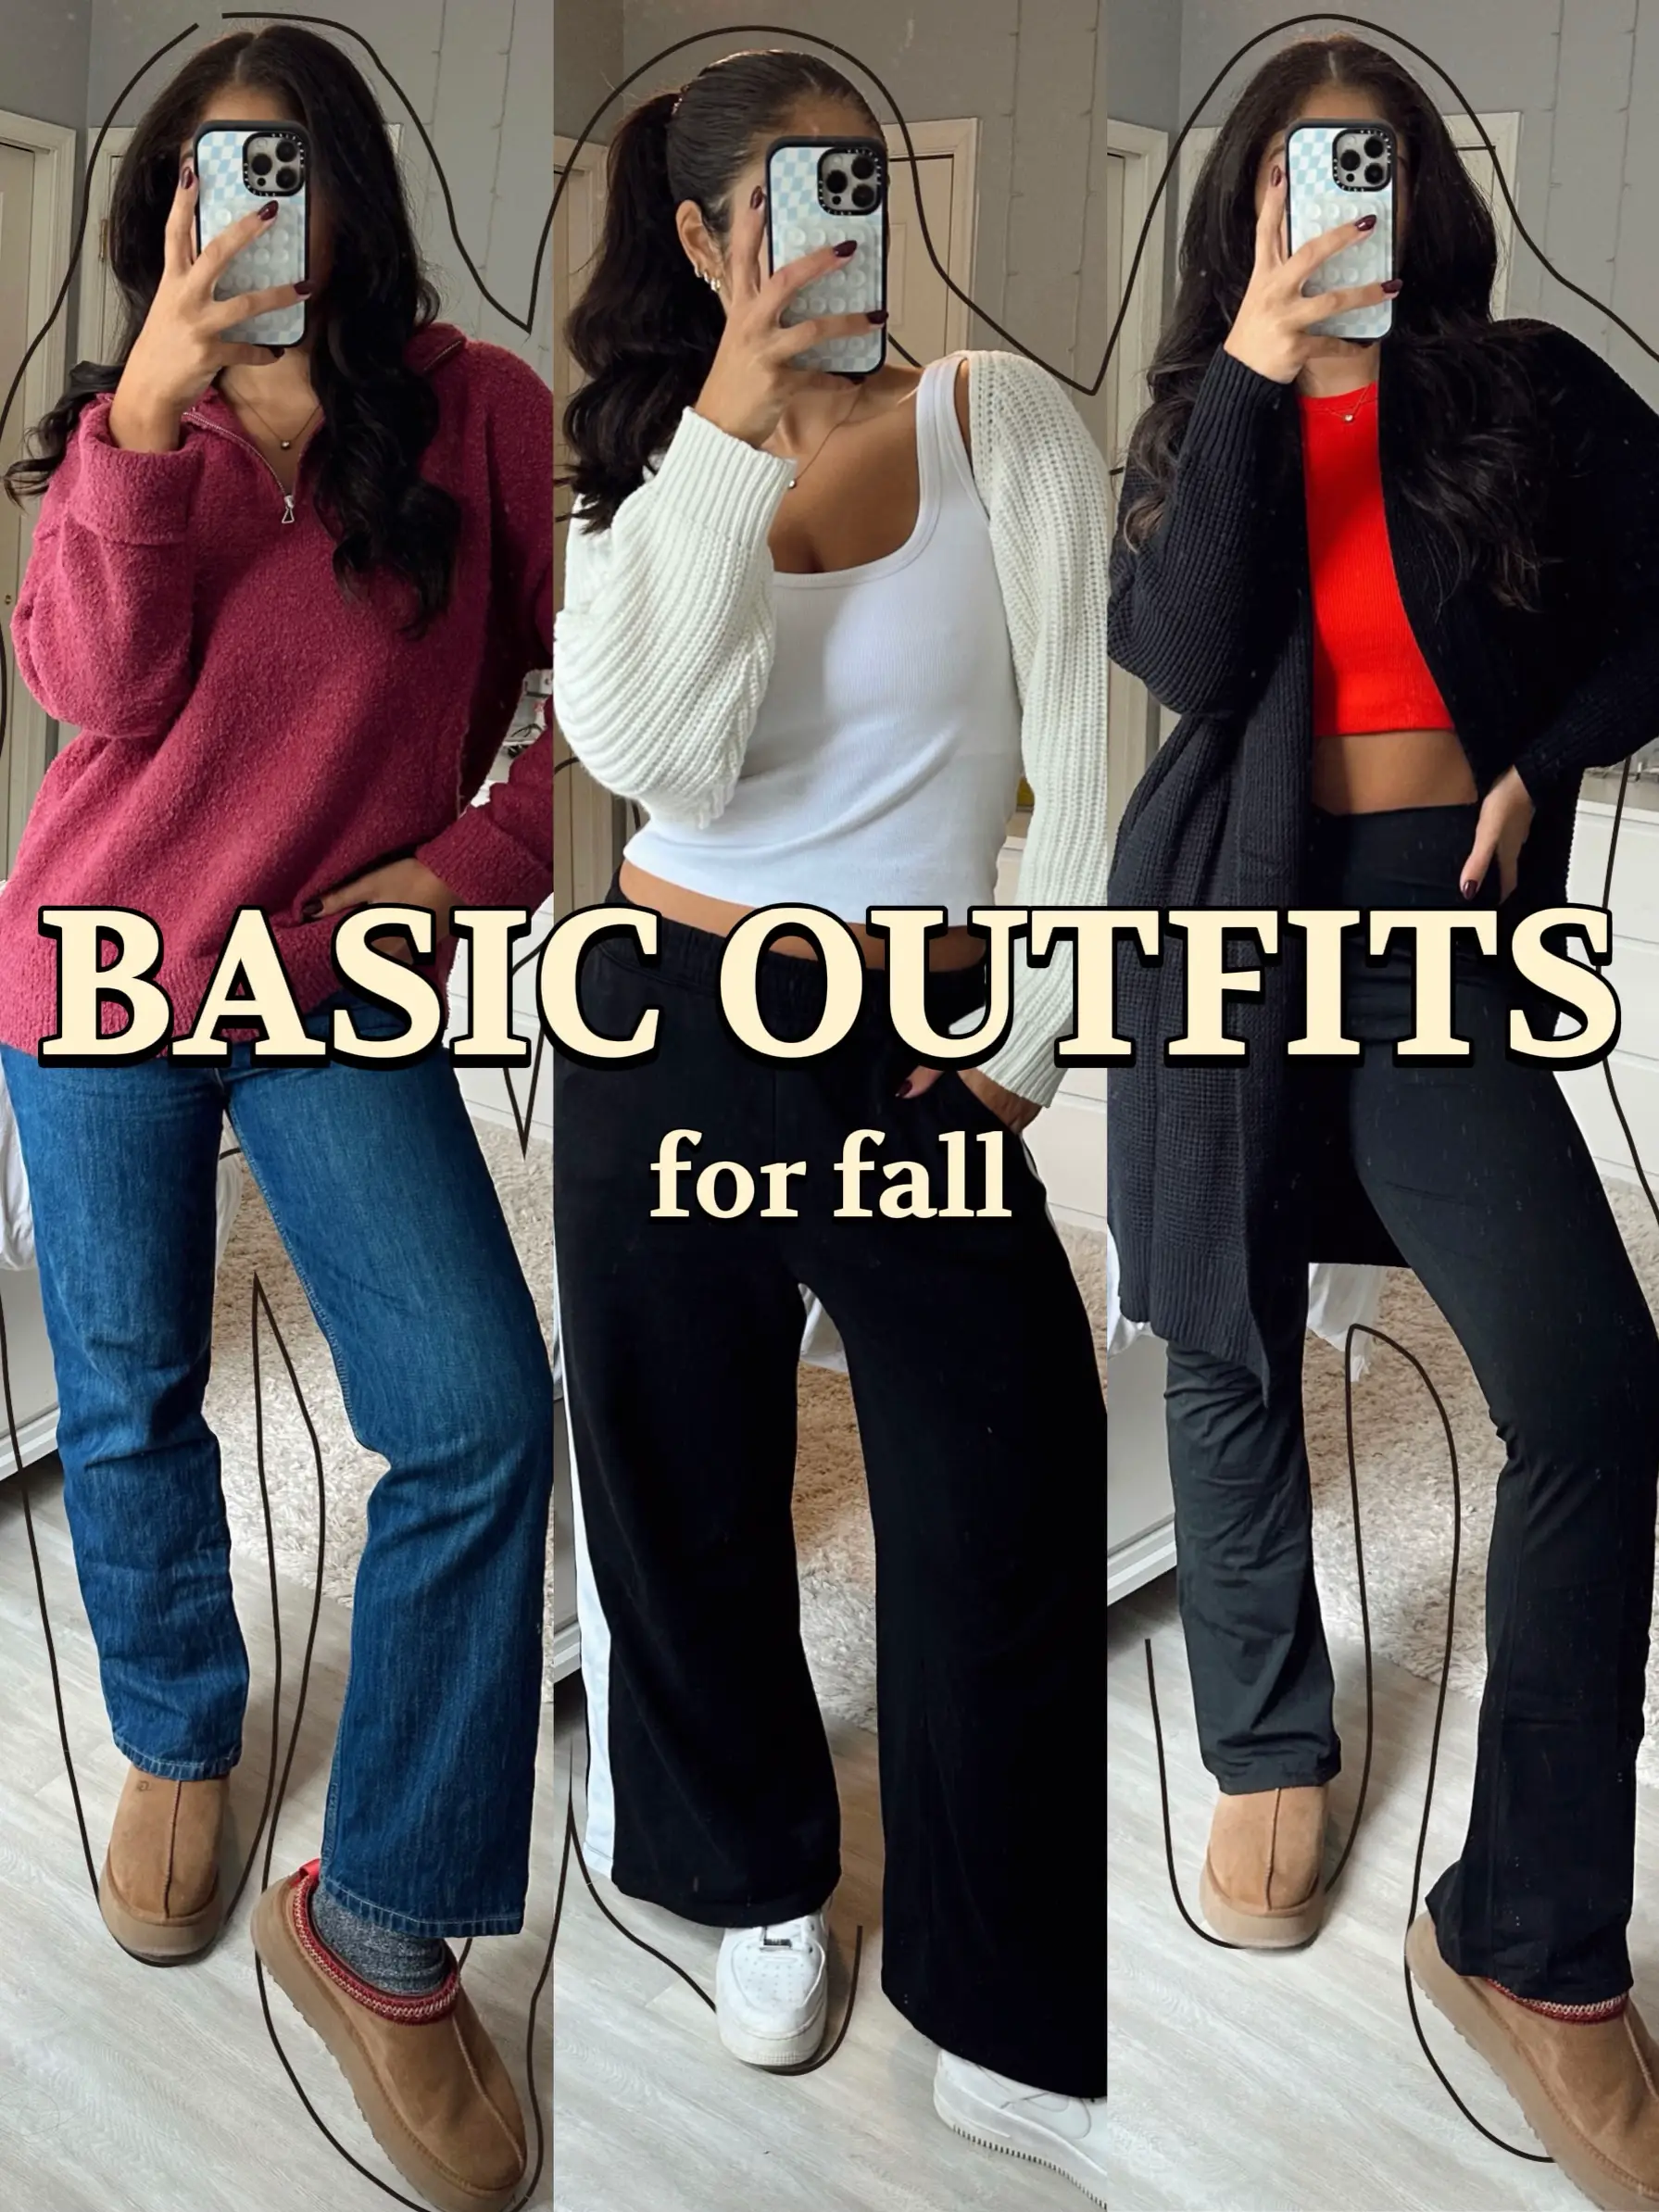 Platform ugg outfits  Flared pants outfit, Pants outfit fall, Flares outfit